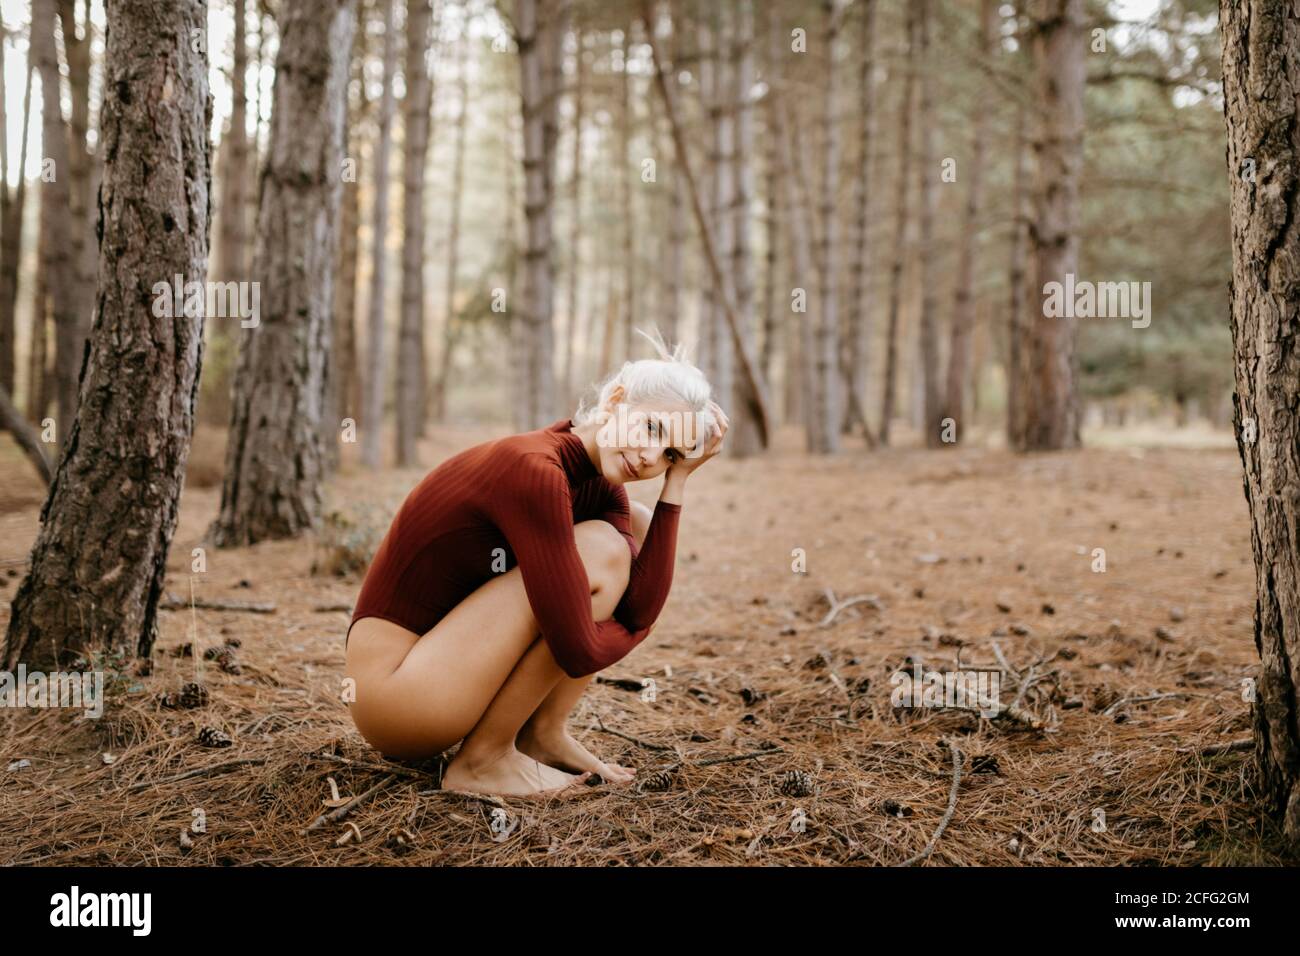 Side view of attractive blonde Woman in leotard squatting and embracing knees sitting barefoot in pine forest Stock Photo